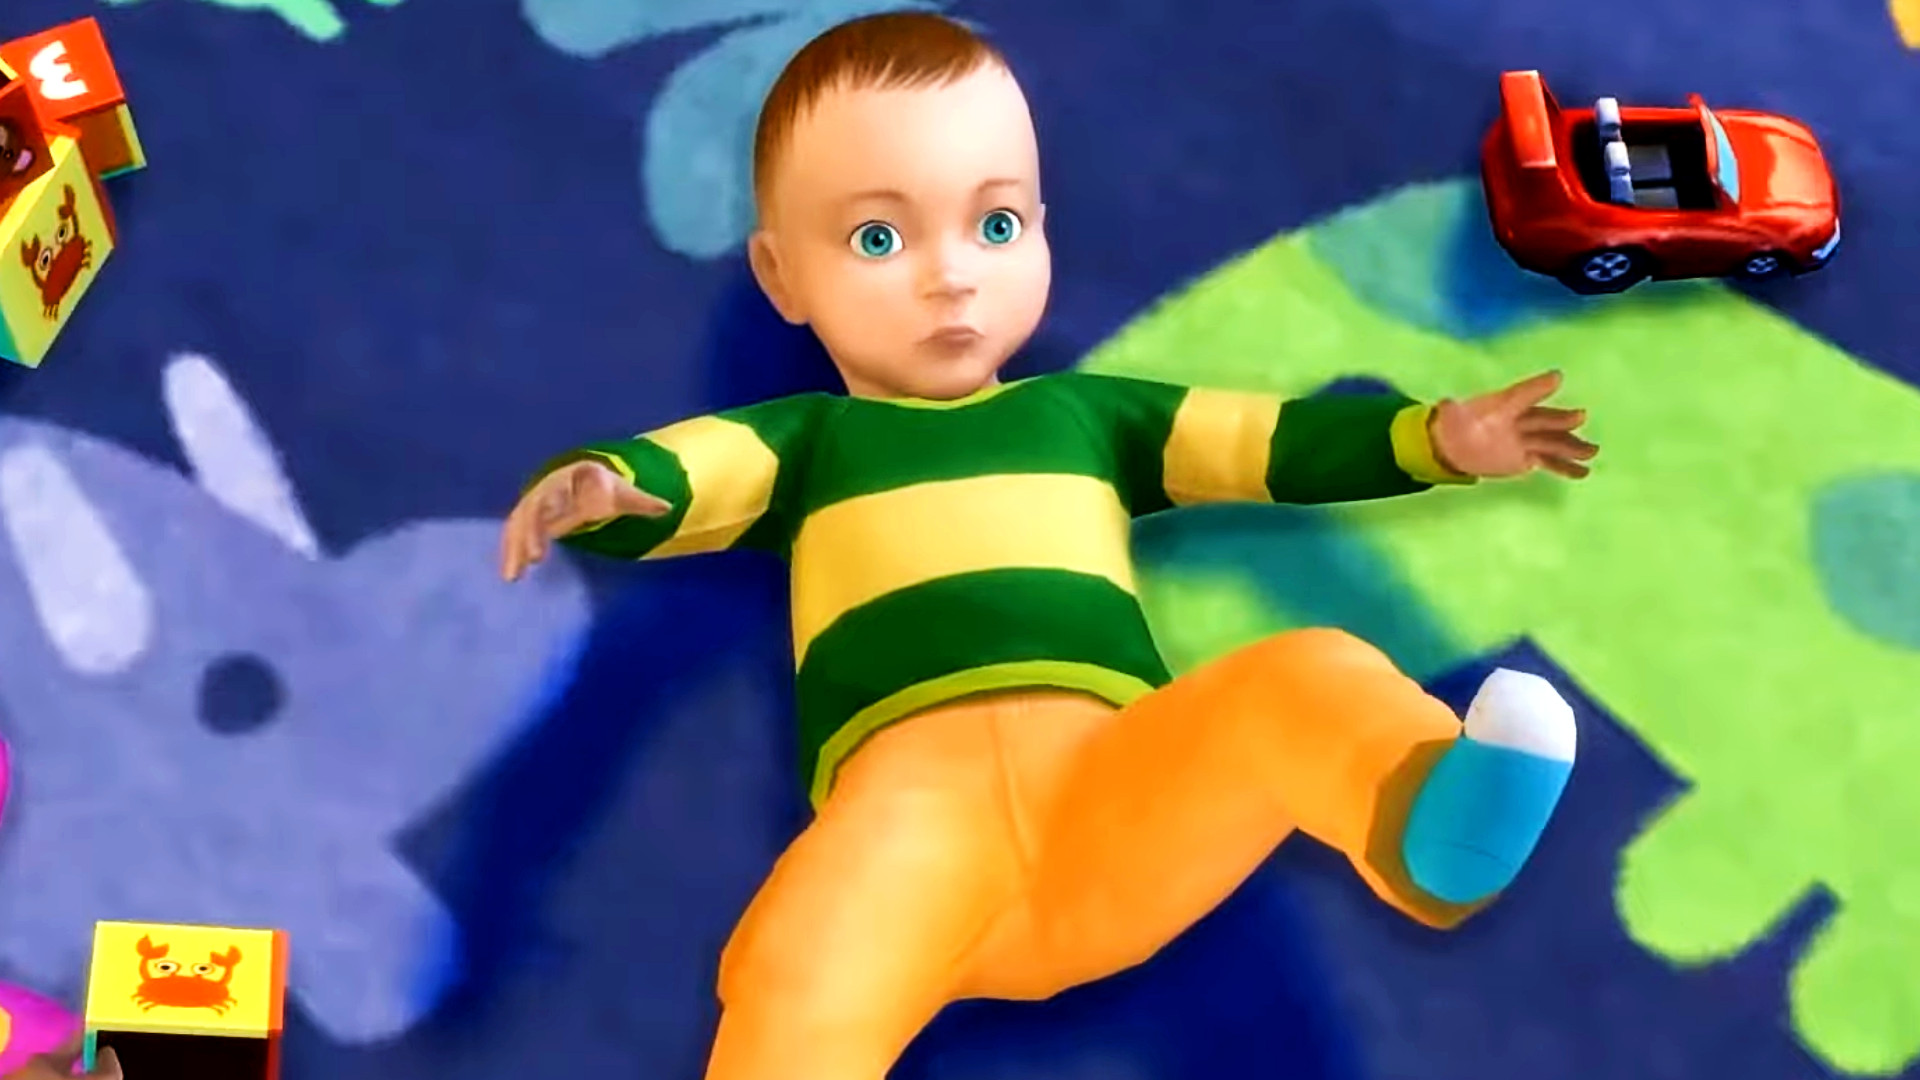 The Sims 4 infant update is overflowing with cuteness, and it’s free